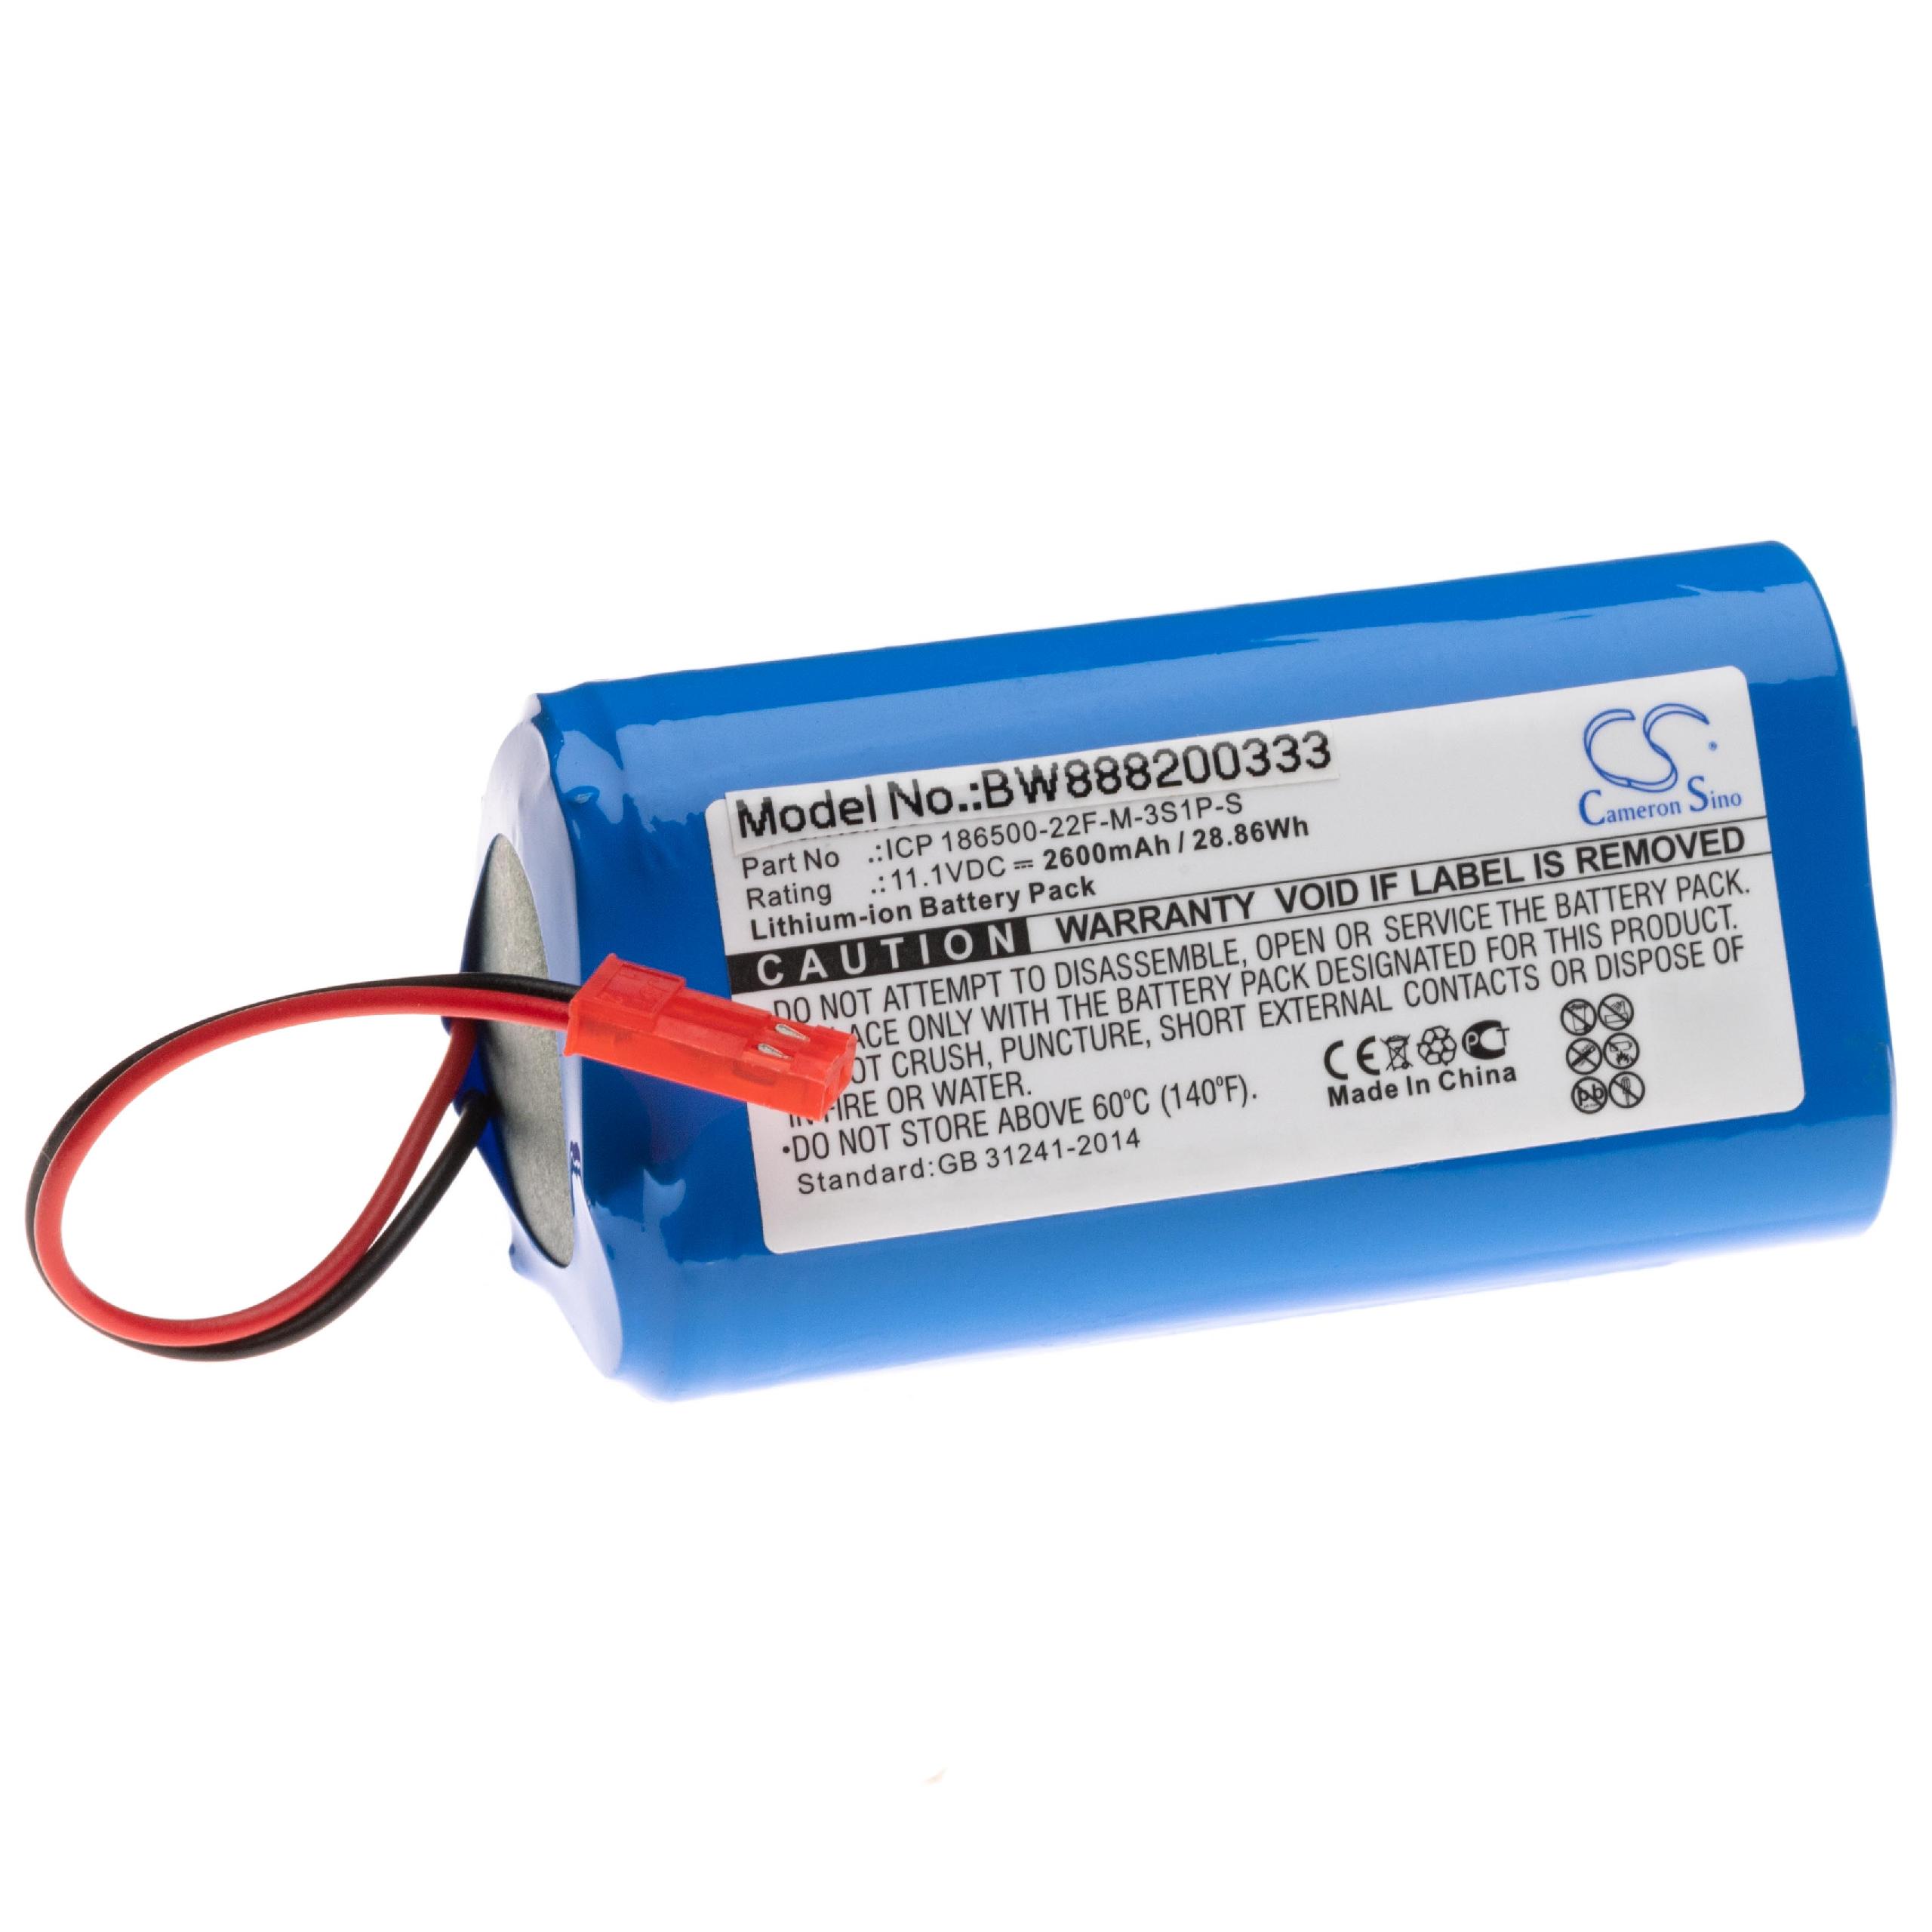 Battery Replacement for Electropan ICP 186500-22F-M-3S1P-S for - 2600mAh, 11.1V, Li-Ion